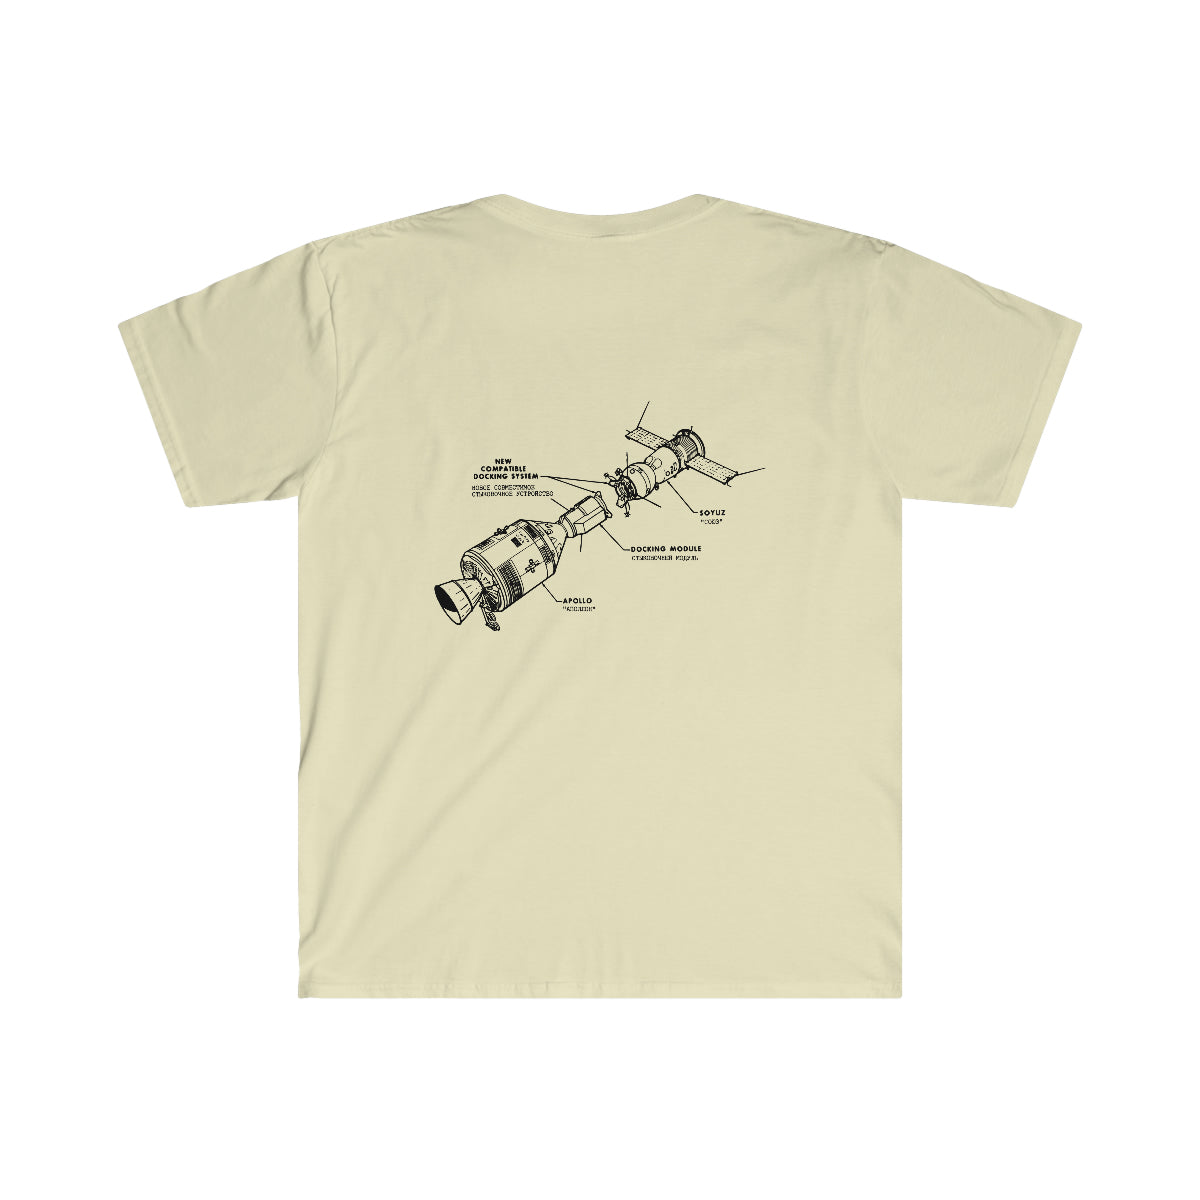 A Apollo Docking T-Shirt with a rocket drawing, perfect for any space enthusiast.